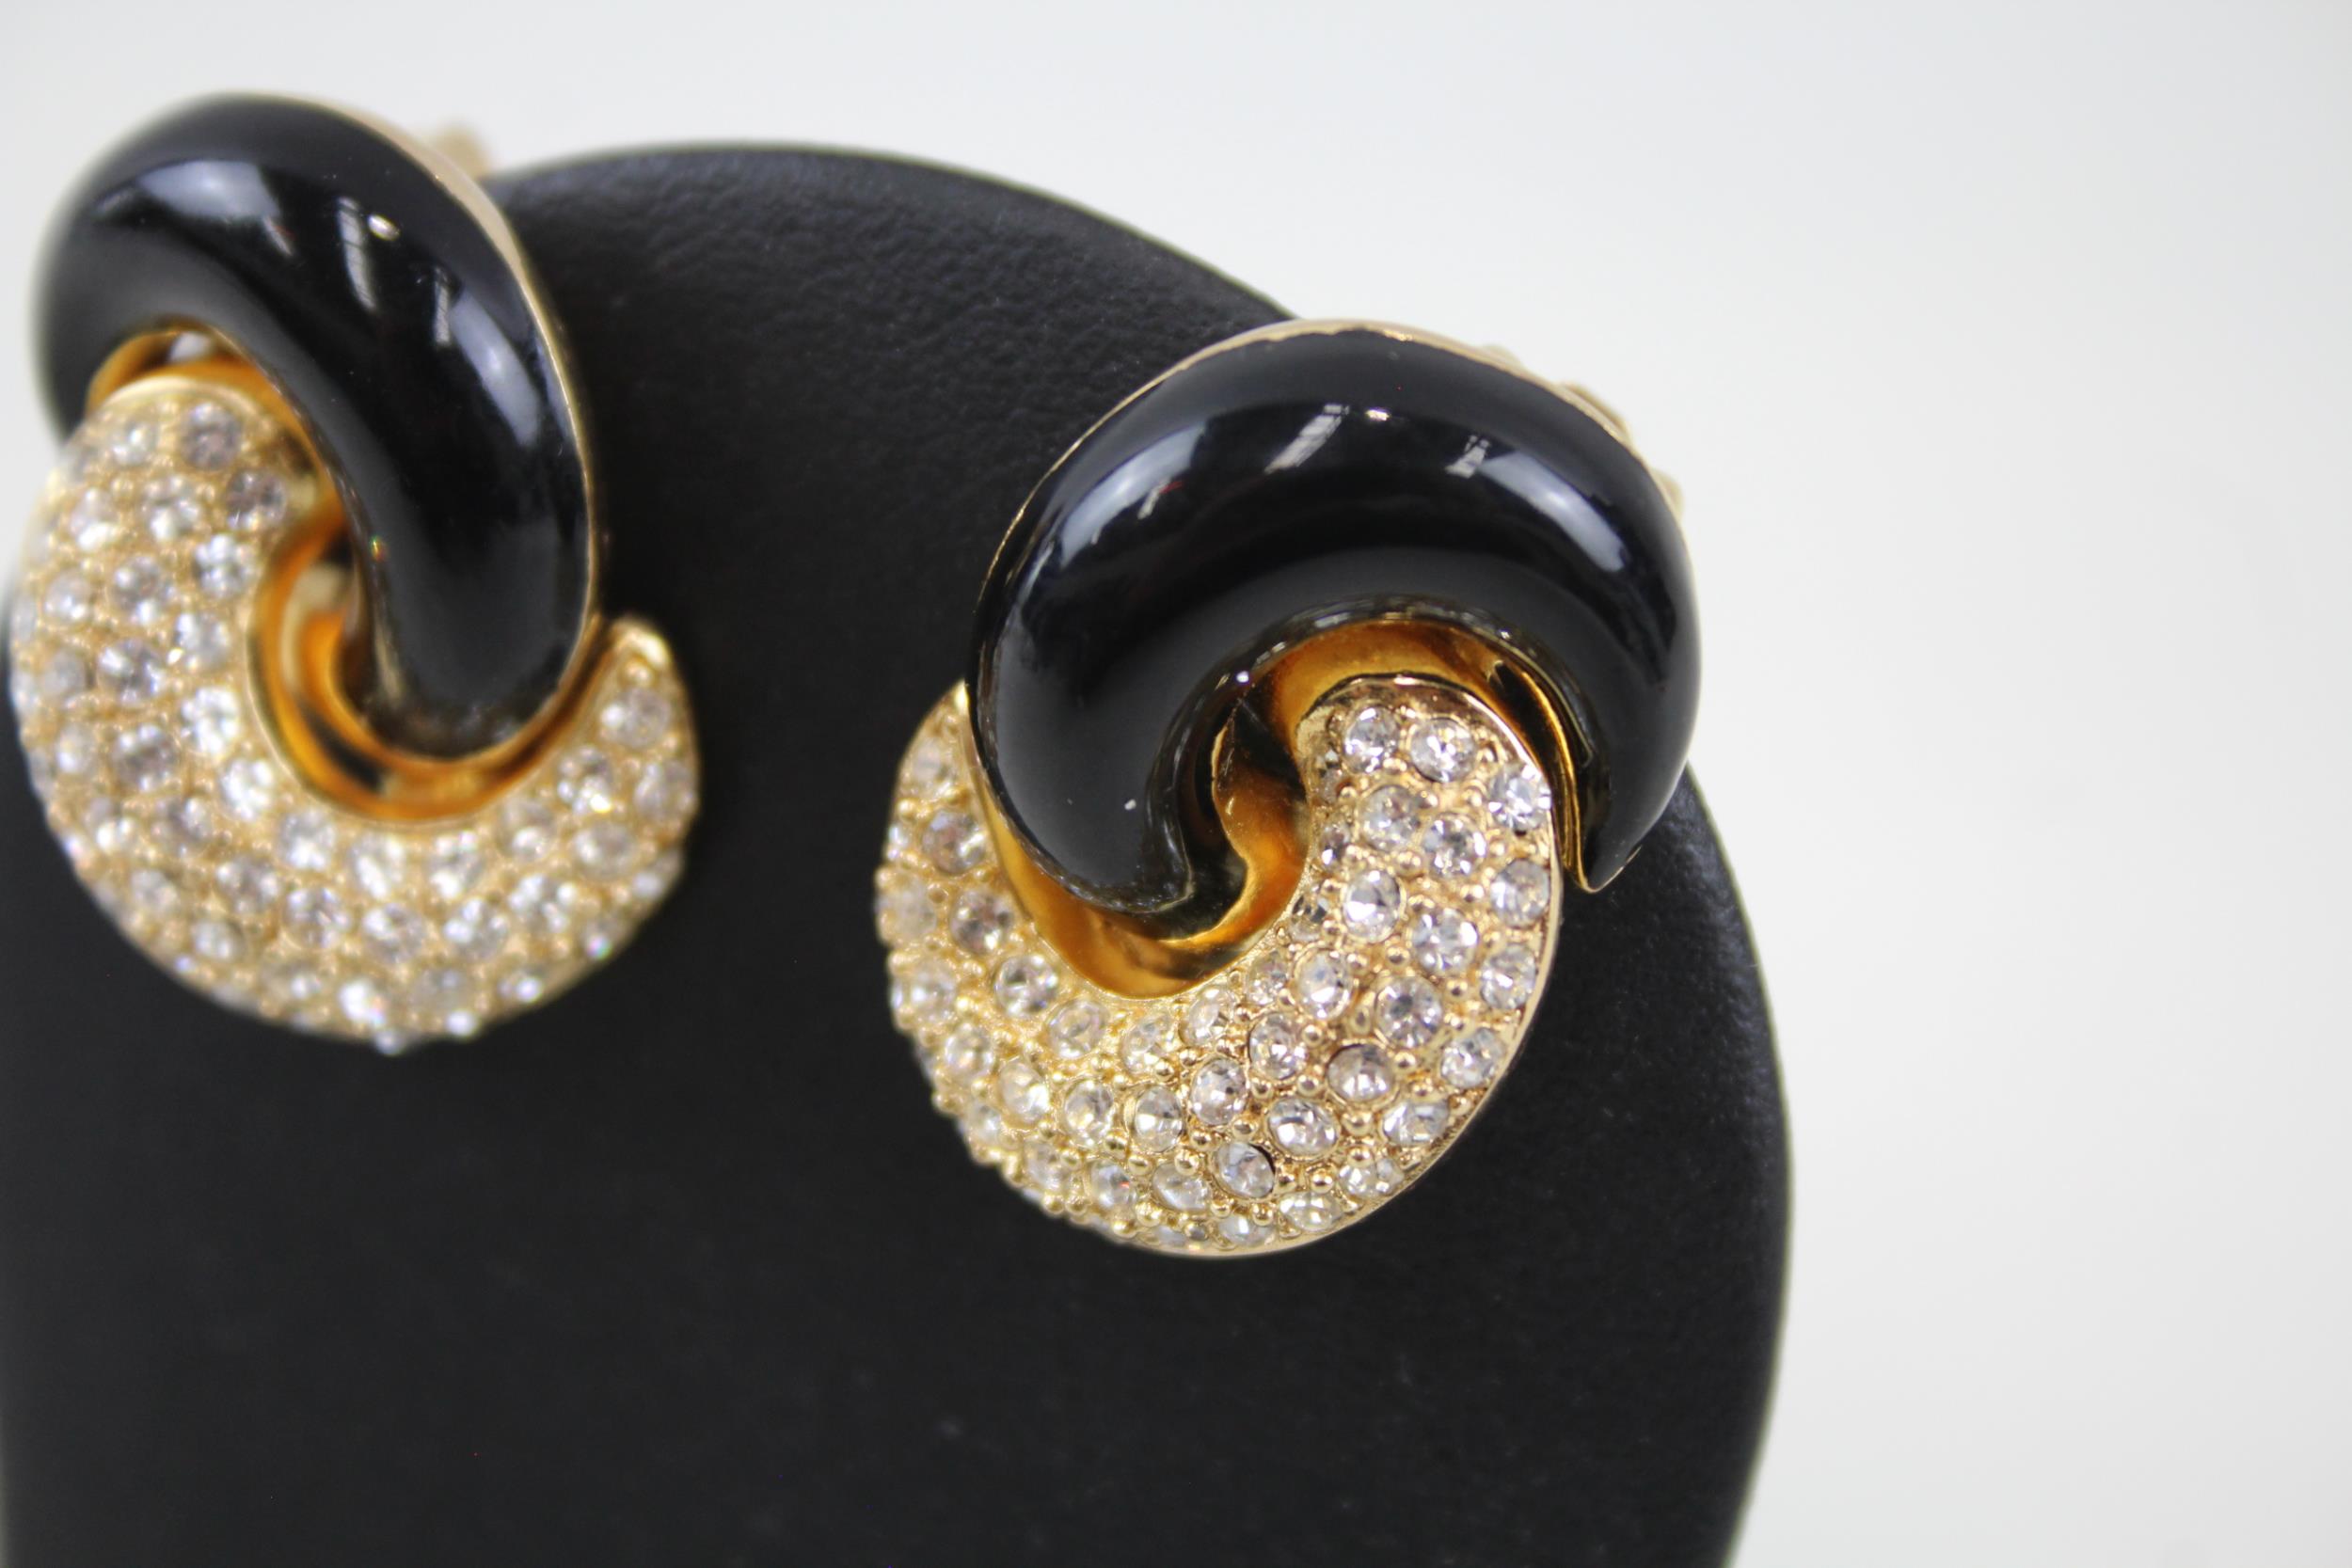 Pair of gold tone enamel and rhinestone clip on earrings by designer Christian Dior (23g) - Image 4 of 5